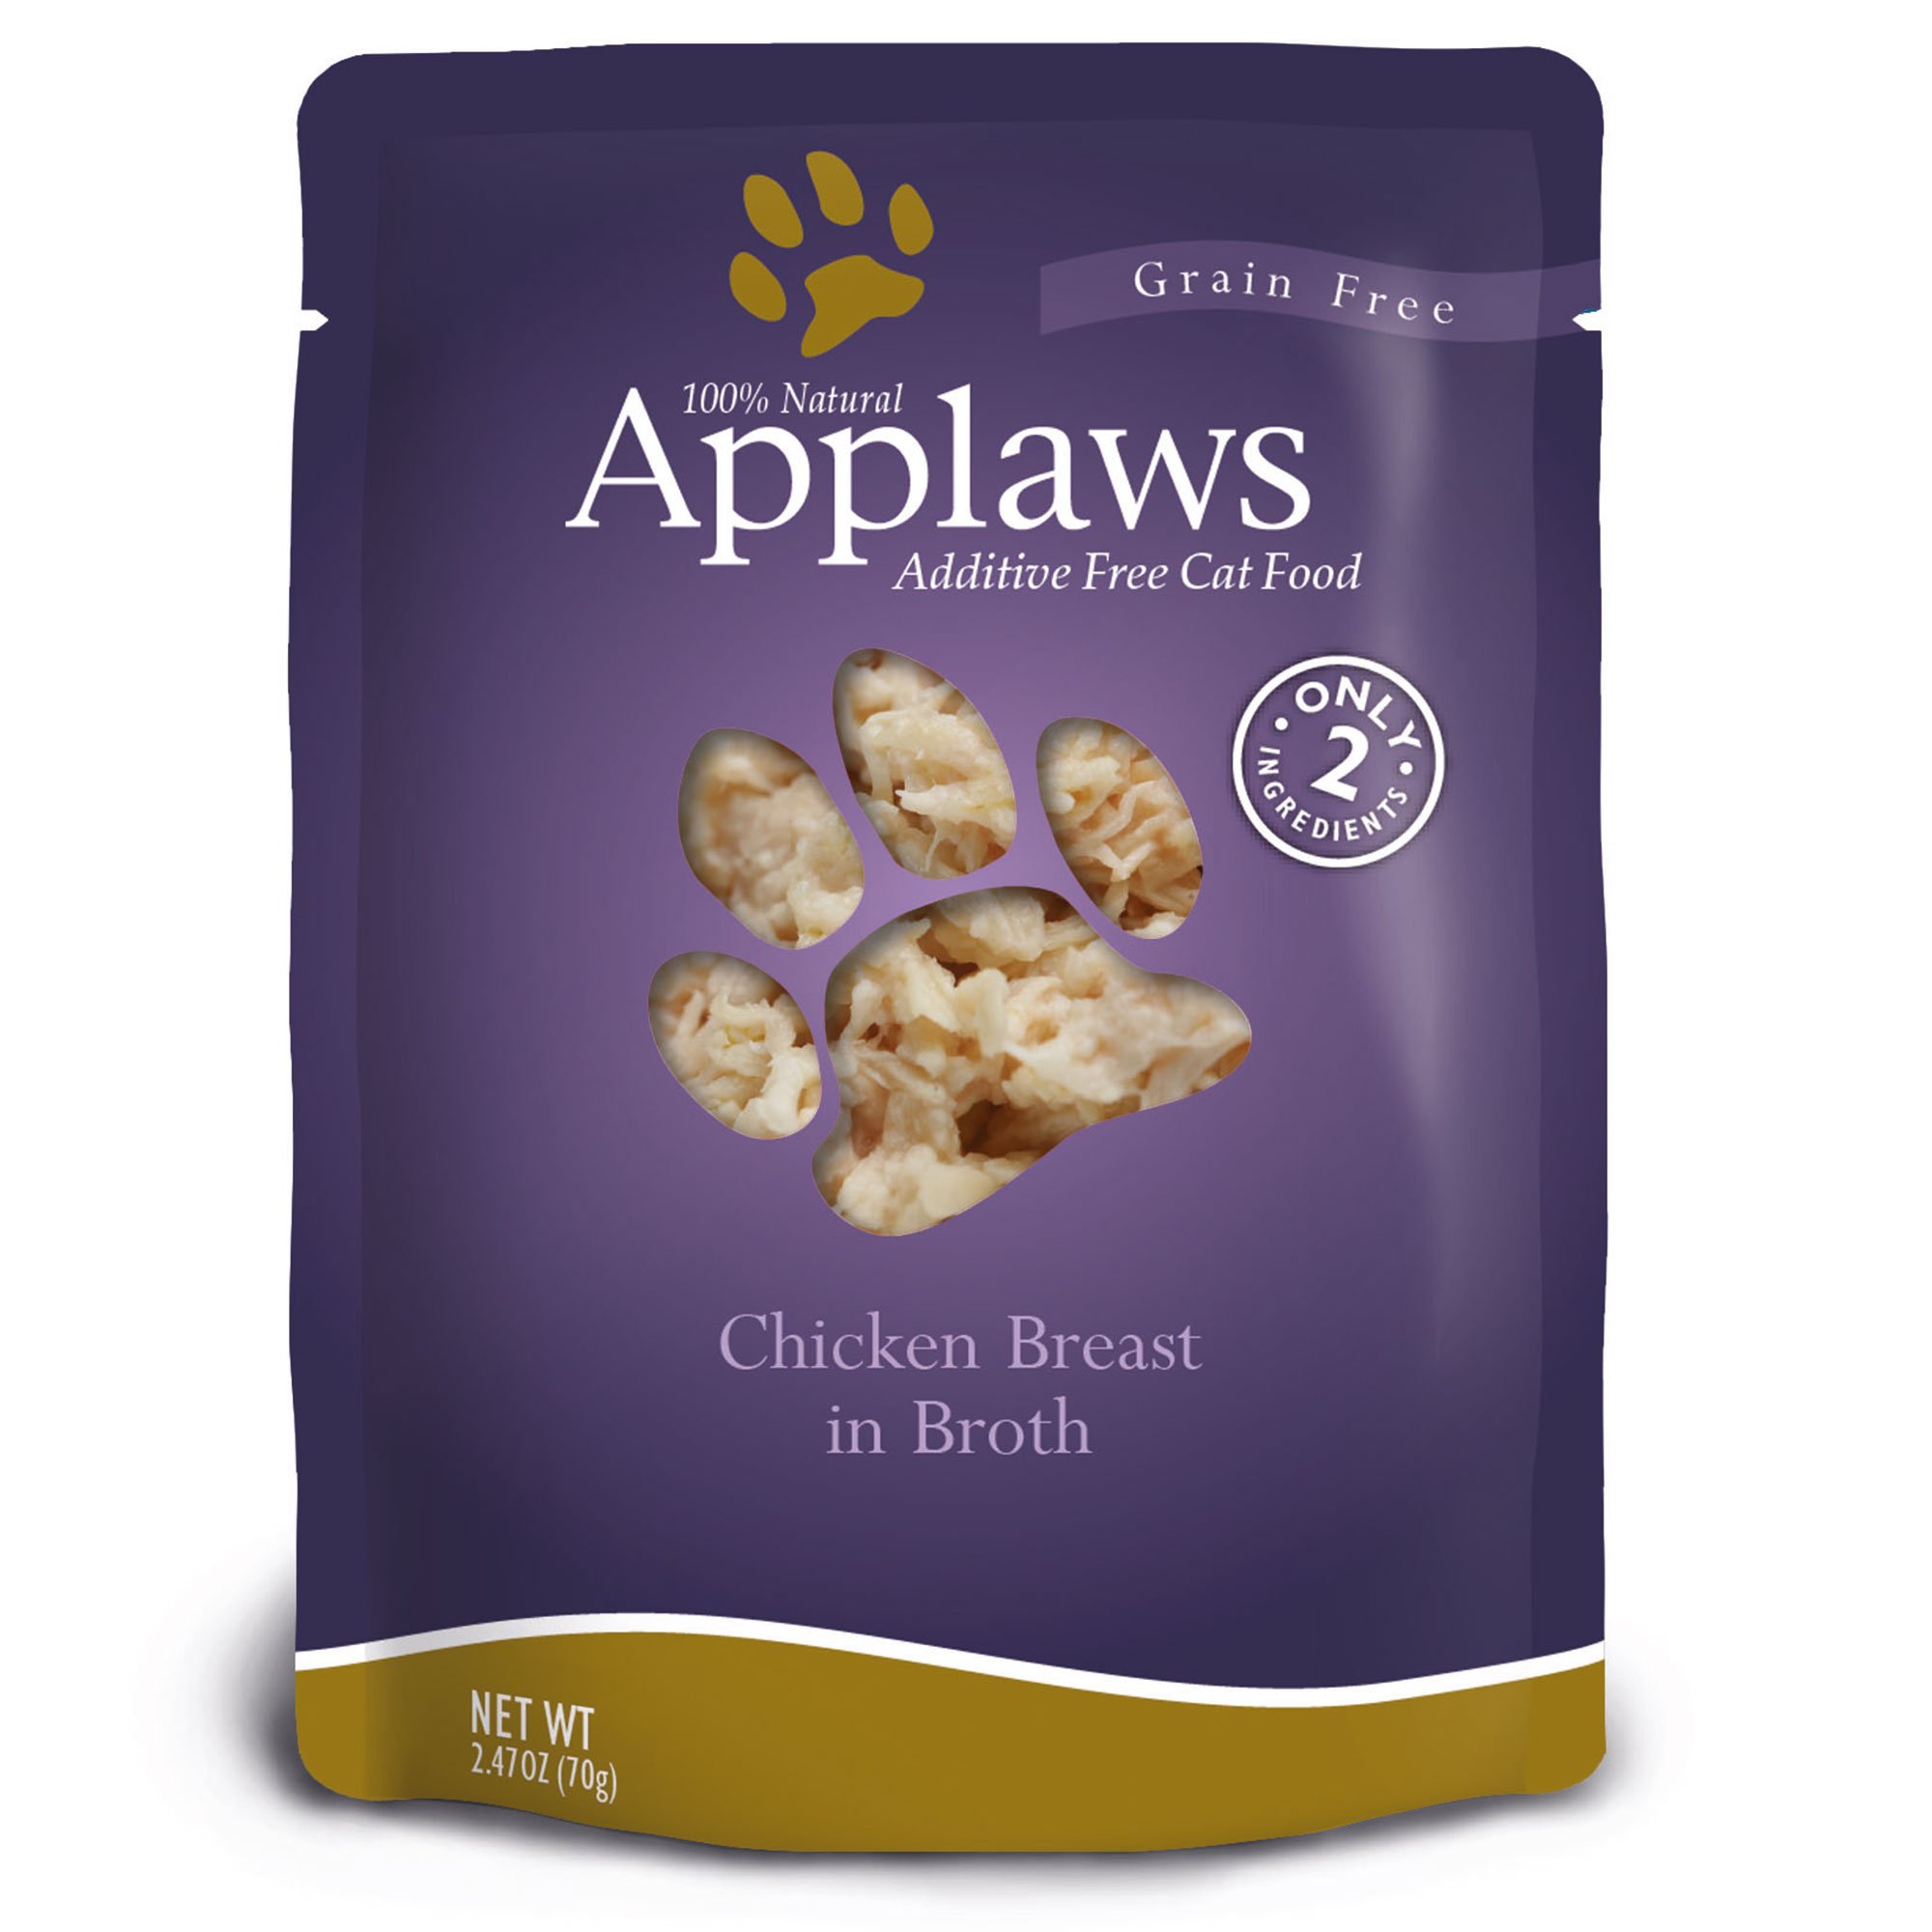 Applaws Chicken Breast in Broth Pouch Grain Free Cat Food ...